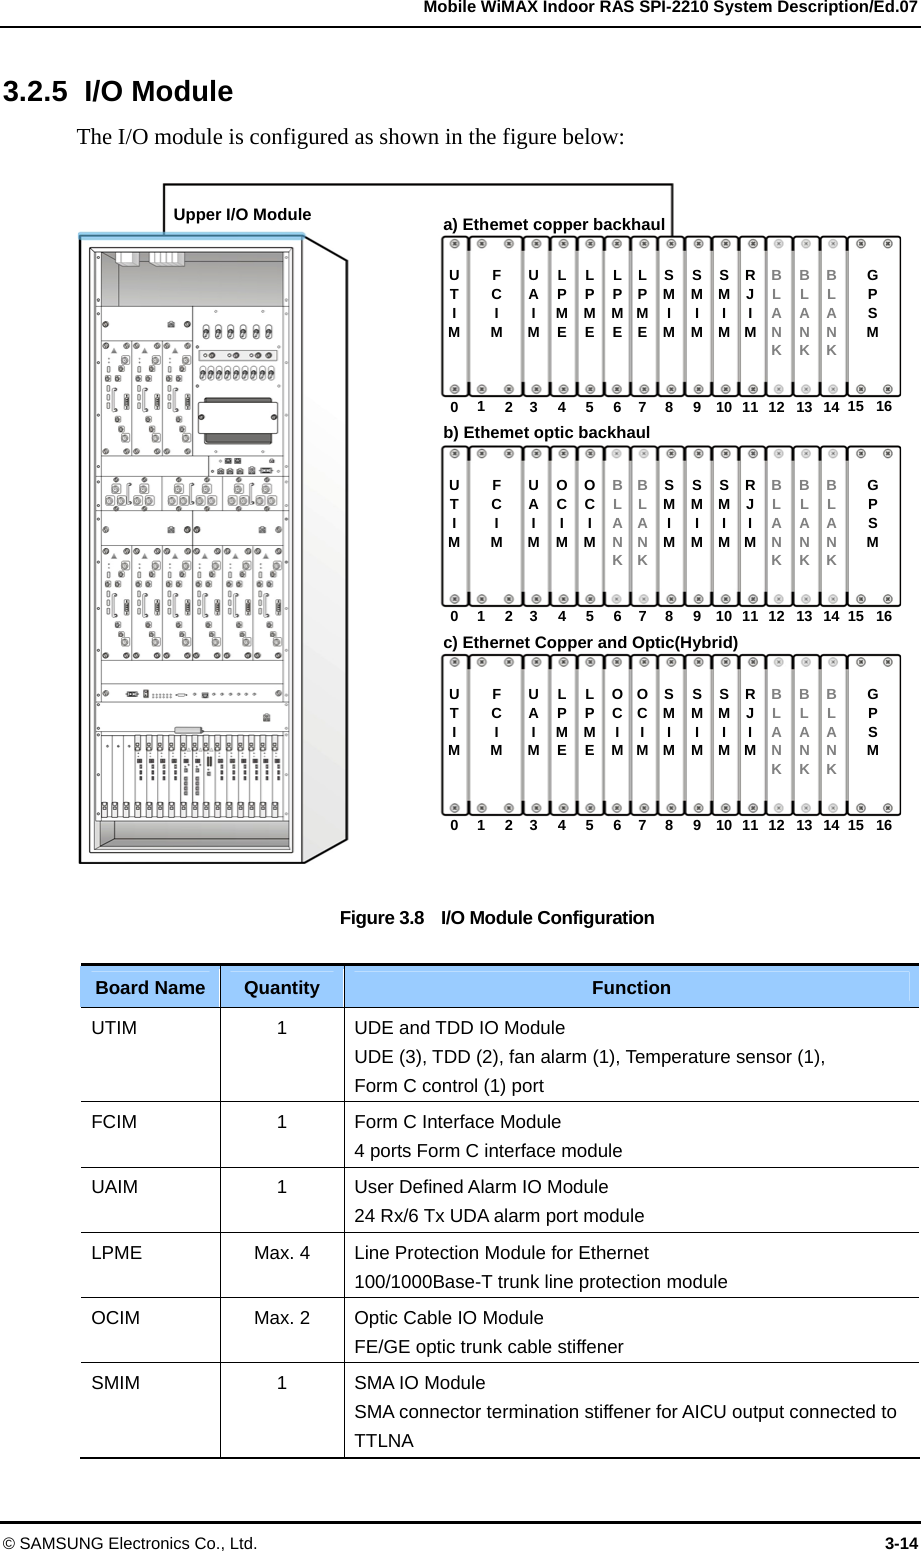   Mobile WiMAX Indoor RAS SPI-2210 System Description/Ed.07 © SAMSUNG Electronics Co., Ltd.  3-14 3.2.5 I/O Module The I/O module is configured as shown in the figure below:  Figure 3.8    I/O Module Configuration  Board Name Quantity Function UTIM 1 UDE and TDD IO Module UDE (3), TDD (2), fan alarm (1), Temperature sensor (1),   Form C control (1) port FCIM 1 Form C Interface Module 4 ports Form C interface module UAIM 1 User Defined Alarm IO Module 24 Rx/6 Tx UDA alarm port module LPME   Max. 4 Line Protection Module for Ethernet 100/1000Base-T trunk line protection module OCIM Max. 2 Optic Cable IO Module FE/GE optic trunk cable stiffener SMIM 1 SMA IO Module SMA connector termination stiffener for AICU output connected to TTLNA a) Ethemet copper backhaul Upper I/O Module U T I M   0   1   2 UAIM   3 R J I M    11 B L A N K   12 B L A N K   13 B L A N K   14 F C I M L P M E    4 L P M E    5 L P M E    6 L P M E    7 SM I M    8   15 G P S M    16 SM I M    9 SM I M    10 U T I M   0   1   2 UAIM   3 R J I M    11 B L A N K   12 B L A N K   13 B L A N K   14 F C I M OC I M    4 O C I M    5 B L A N K   6 B L A N K   7 SM I M    8   15 G P S M    16 SM I M    9 SM I M    10 U T I M   0   1   2 UAIM   3 R J I M    11 B L A N K   12 B L A N K   13 B L A N K   14 F C I M L P M E    4 L P M E    5 OC I M    6 OC I M    7 SM I M    8   15 G P S M    16 SM I M    9 SM I M    10 b) Ethemet optic backhaul c) Ethernet Copper and Optic(Hybrid) 